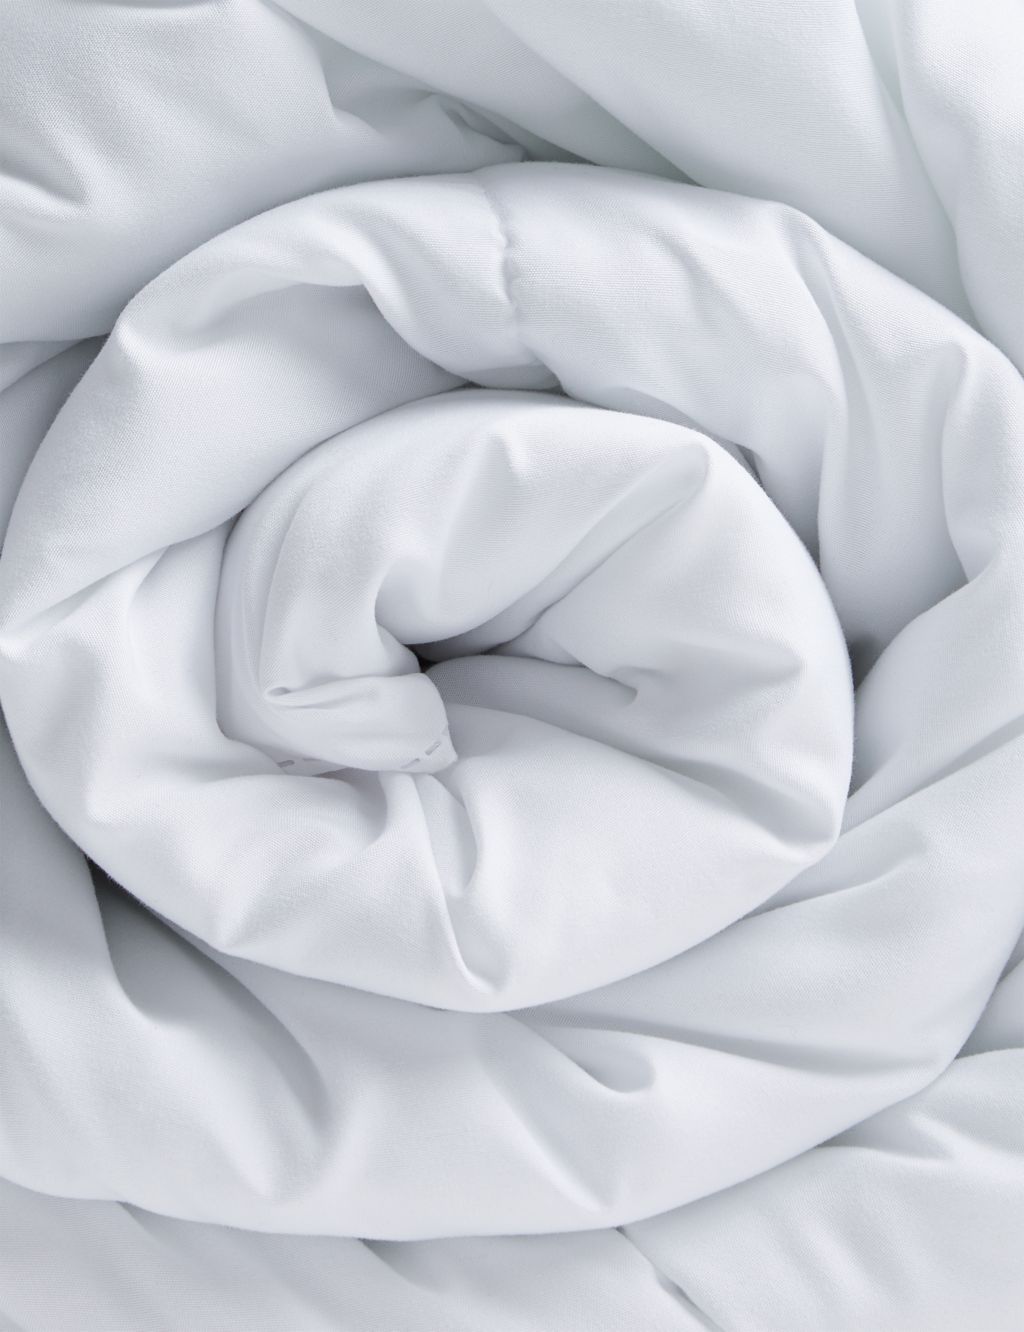 Simply Protect 4.5 Tog Duvet image 2